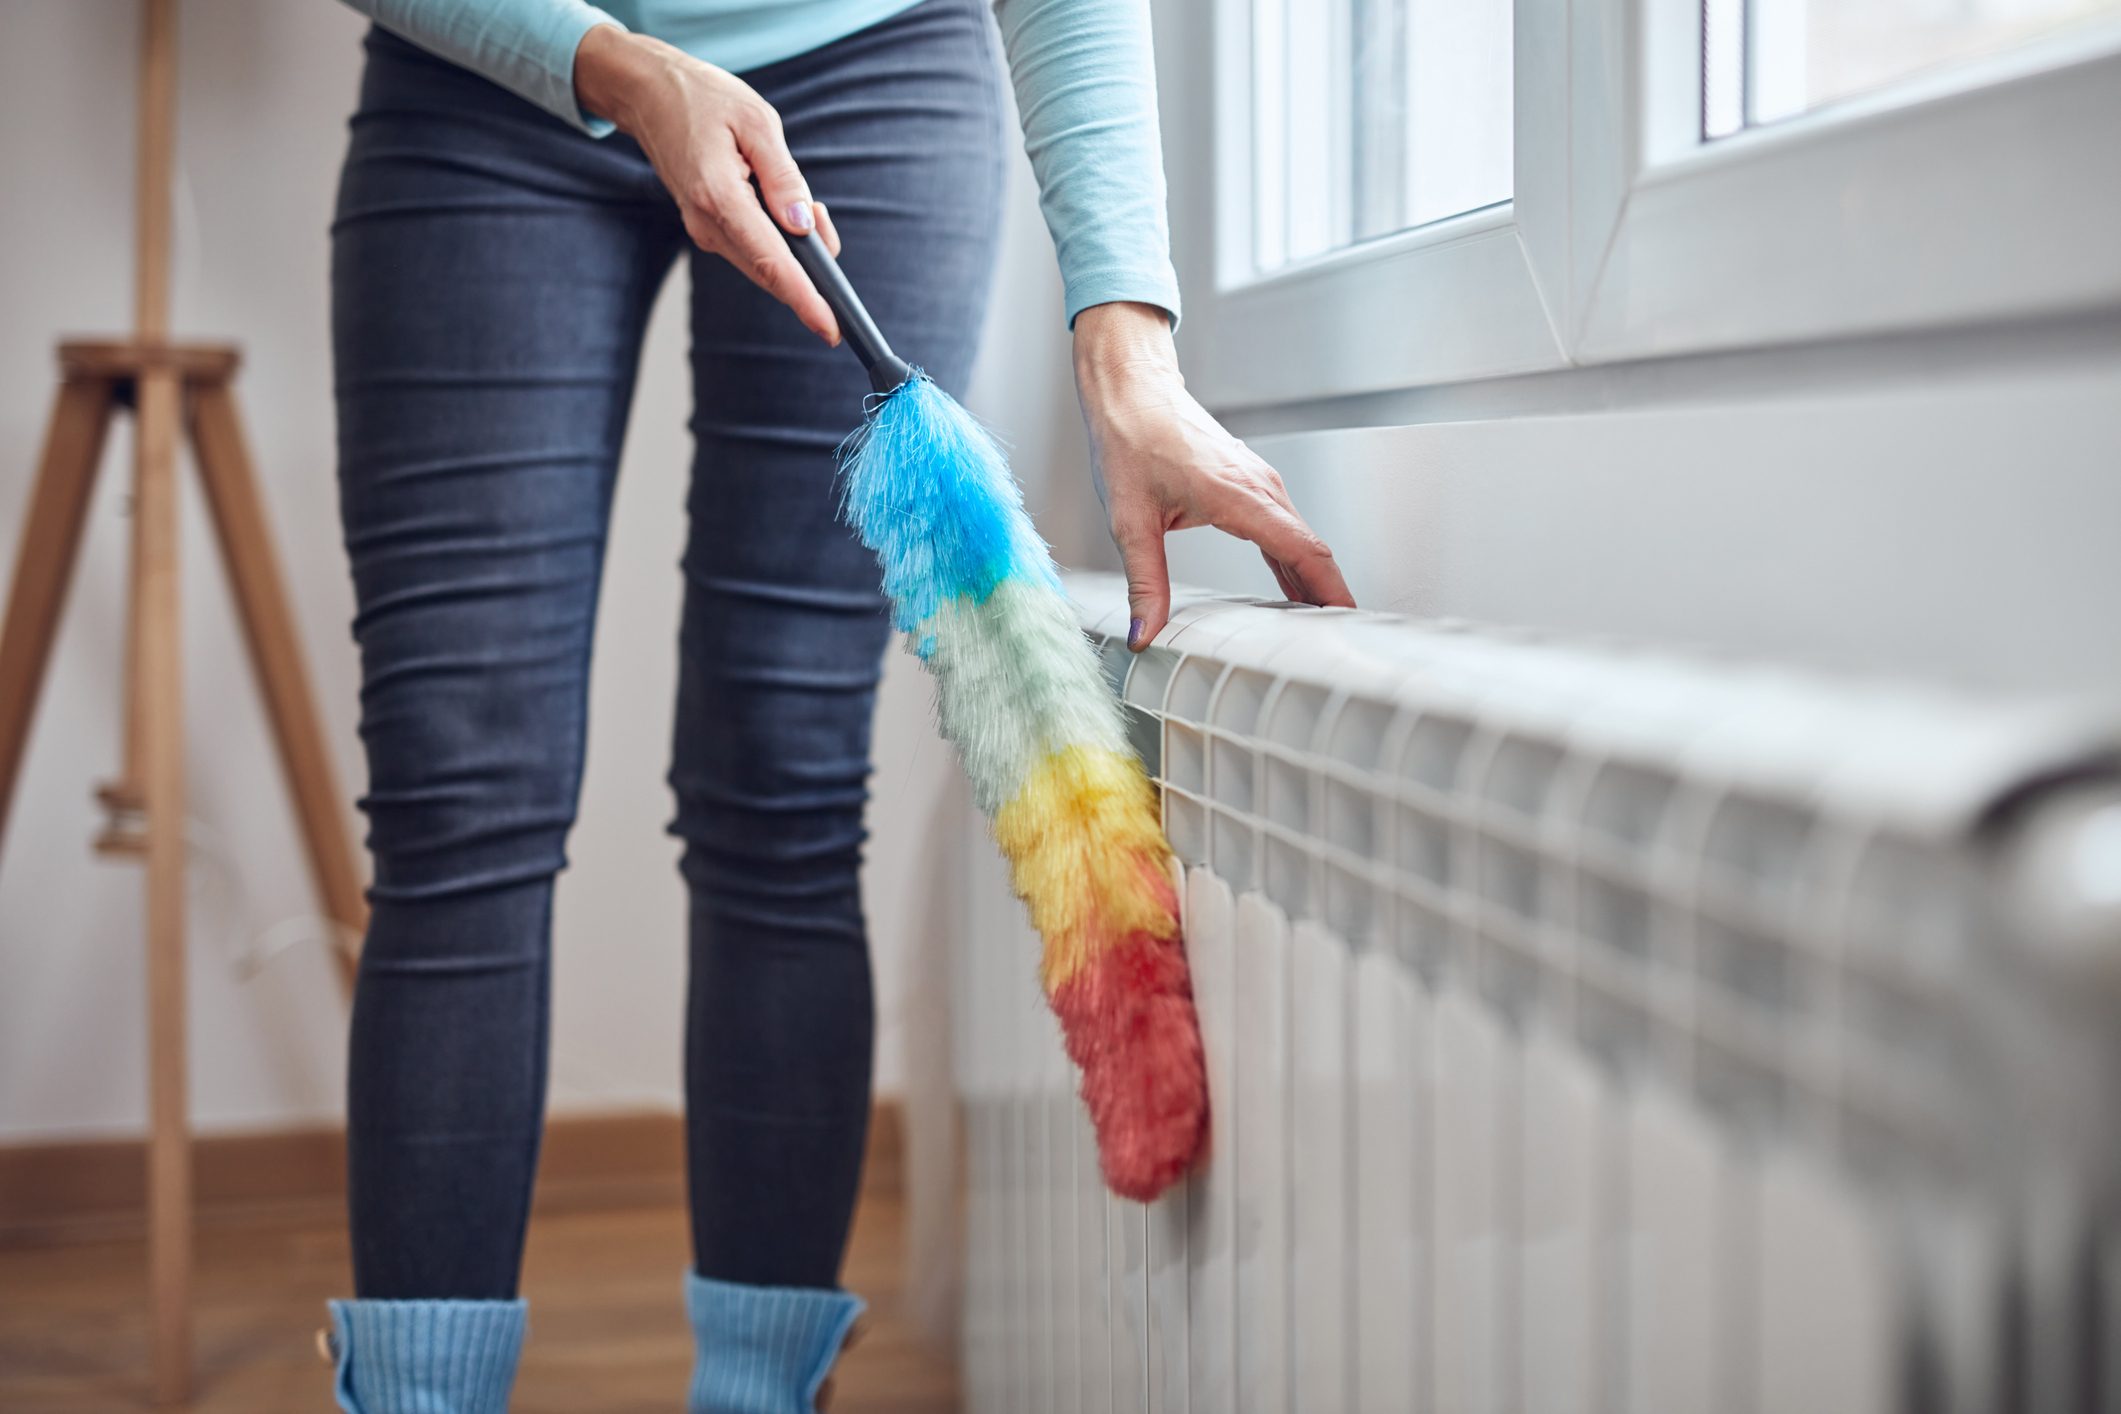 Woman with a dust stick cleaning central heating gas radiator at home.